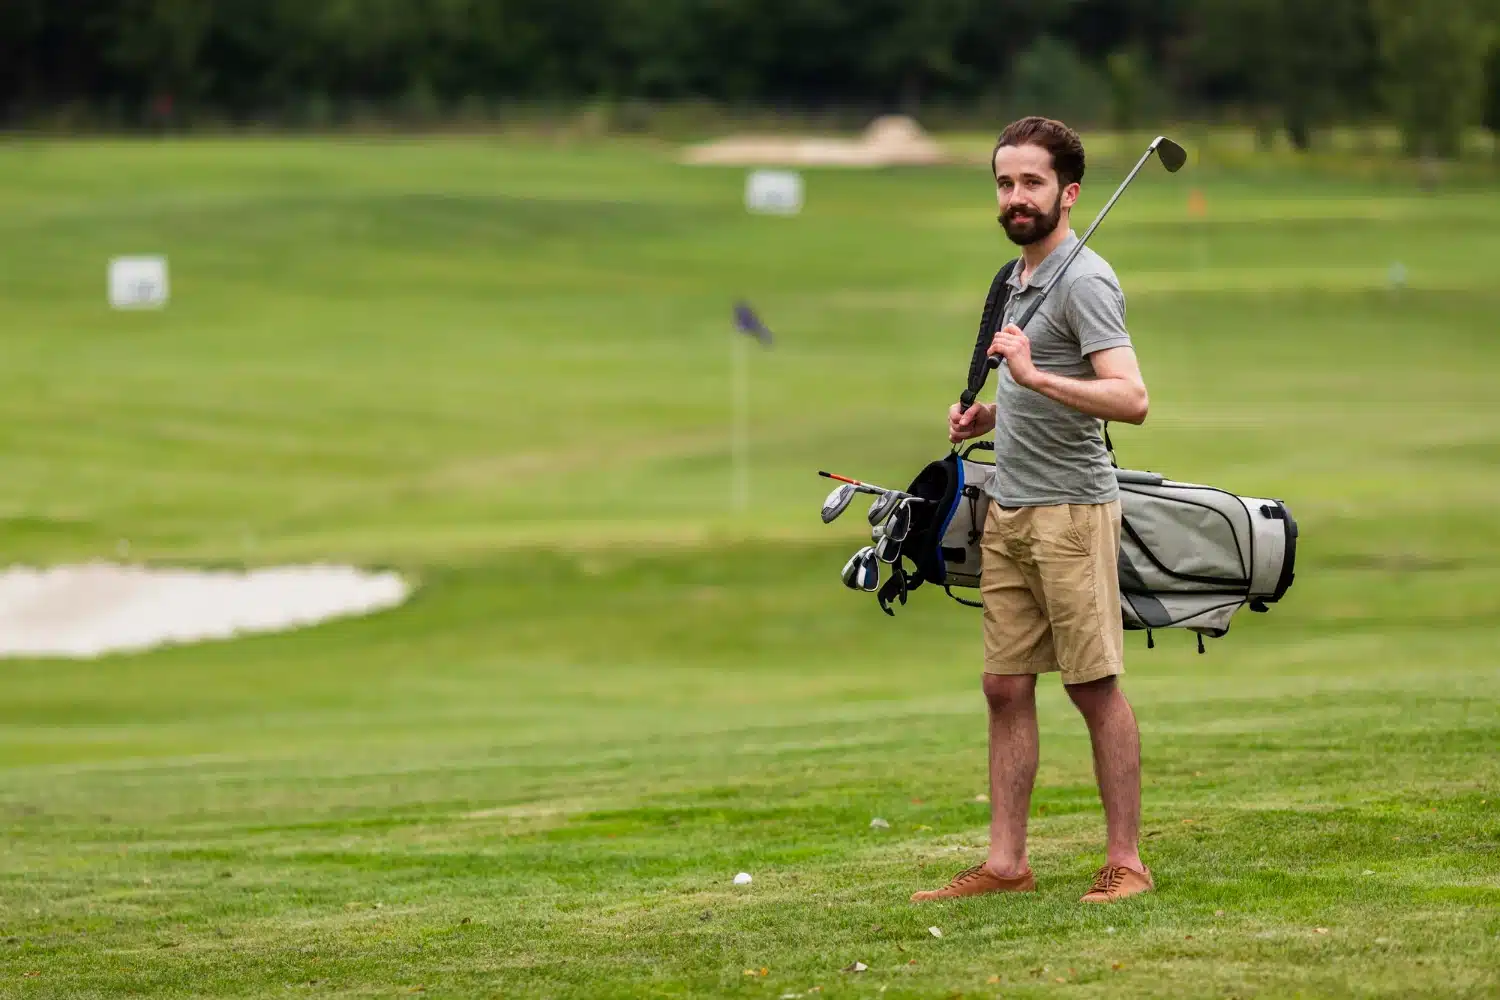 Hit The Links In Style With Sunday Golf’s Lightweight Golf Bags